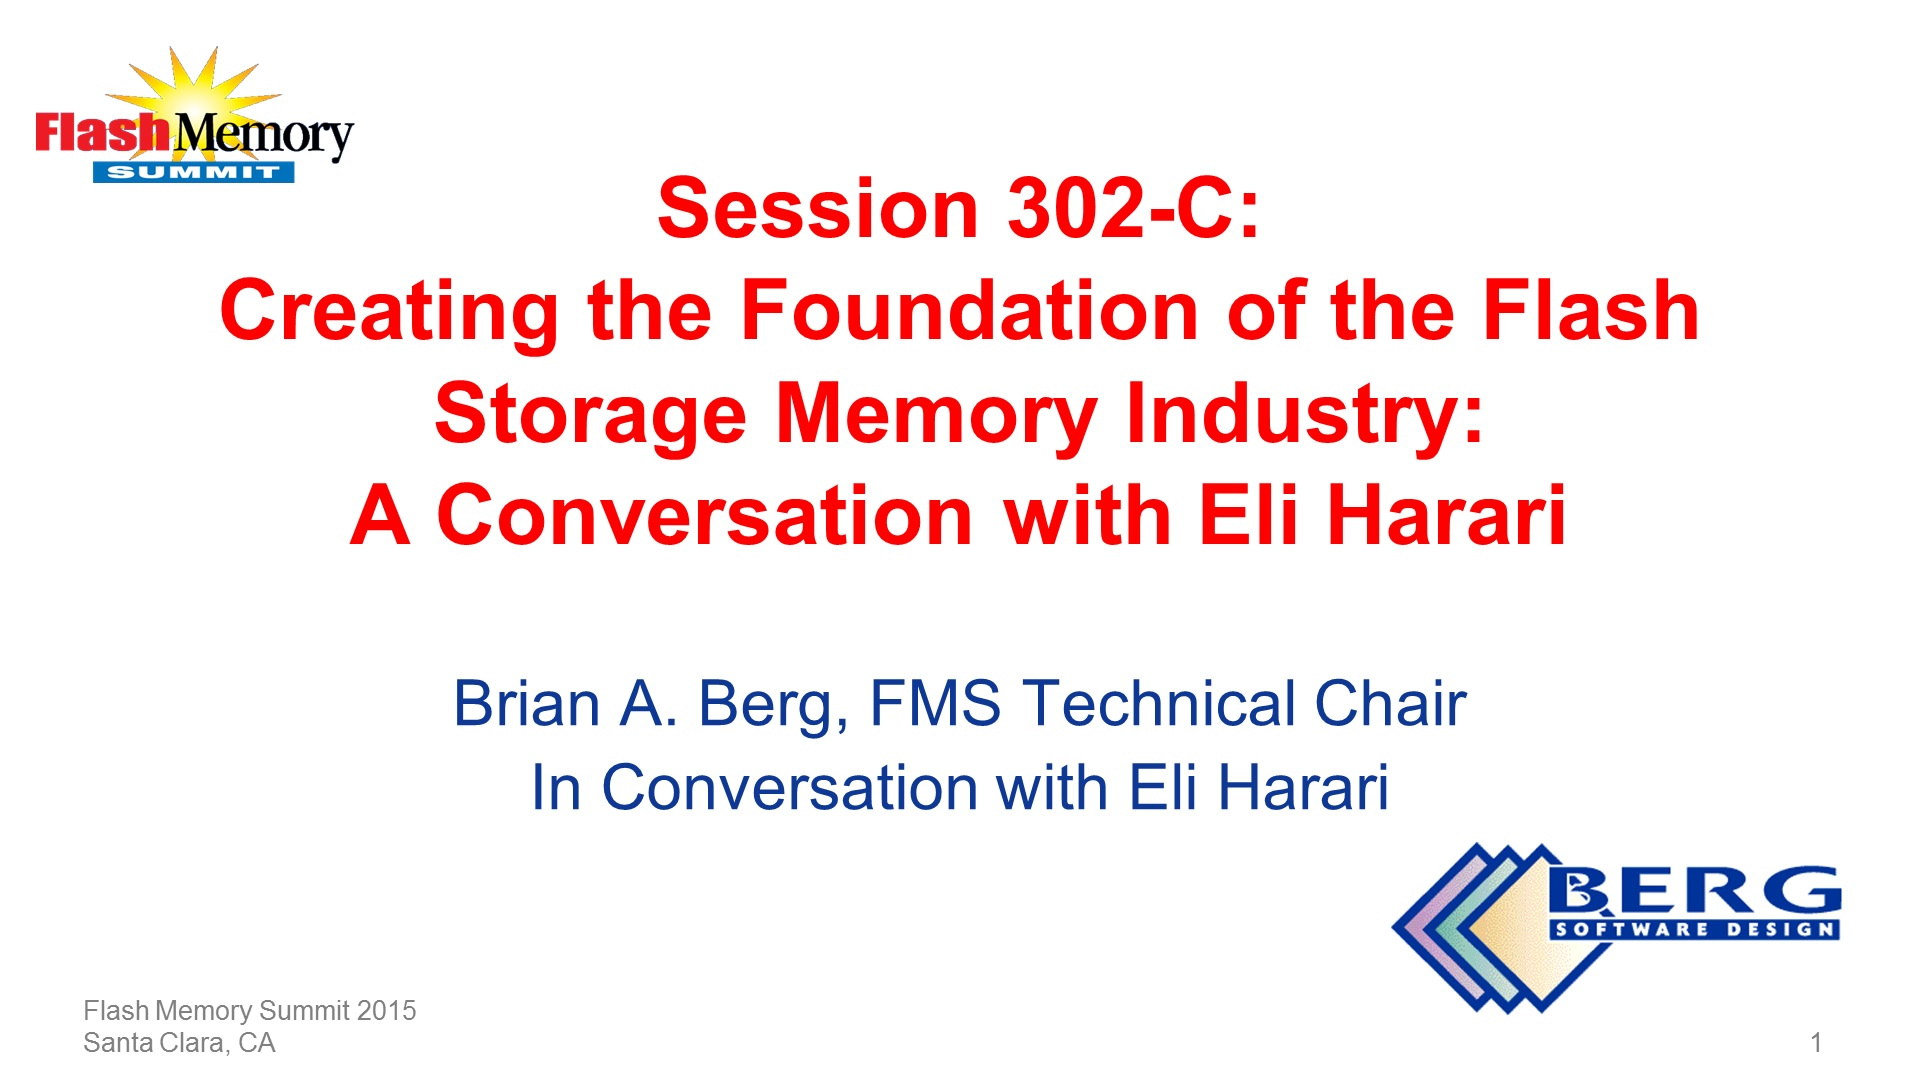 Introduction to the Conversation with Eli Harari